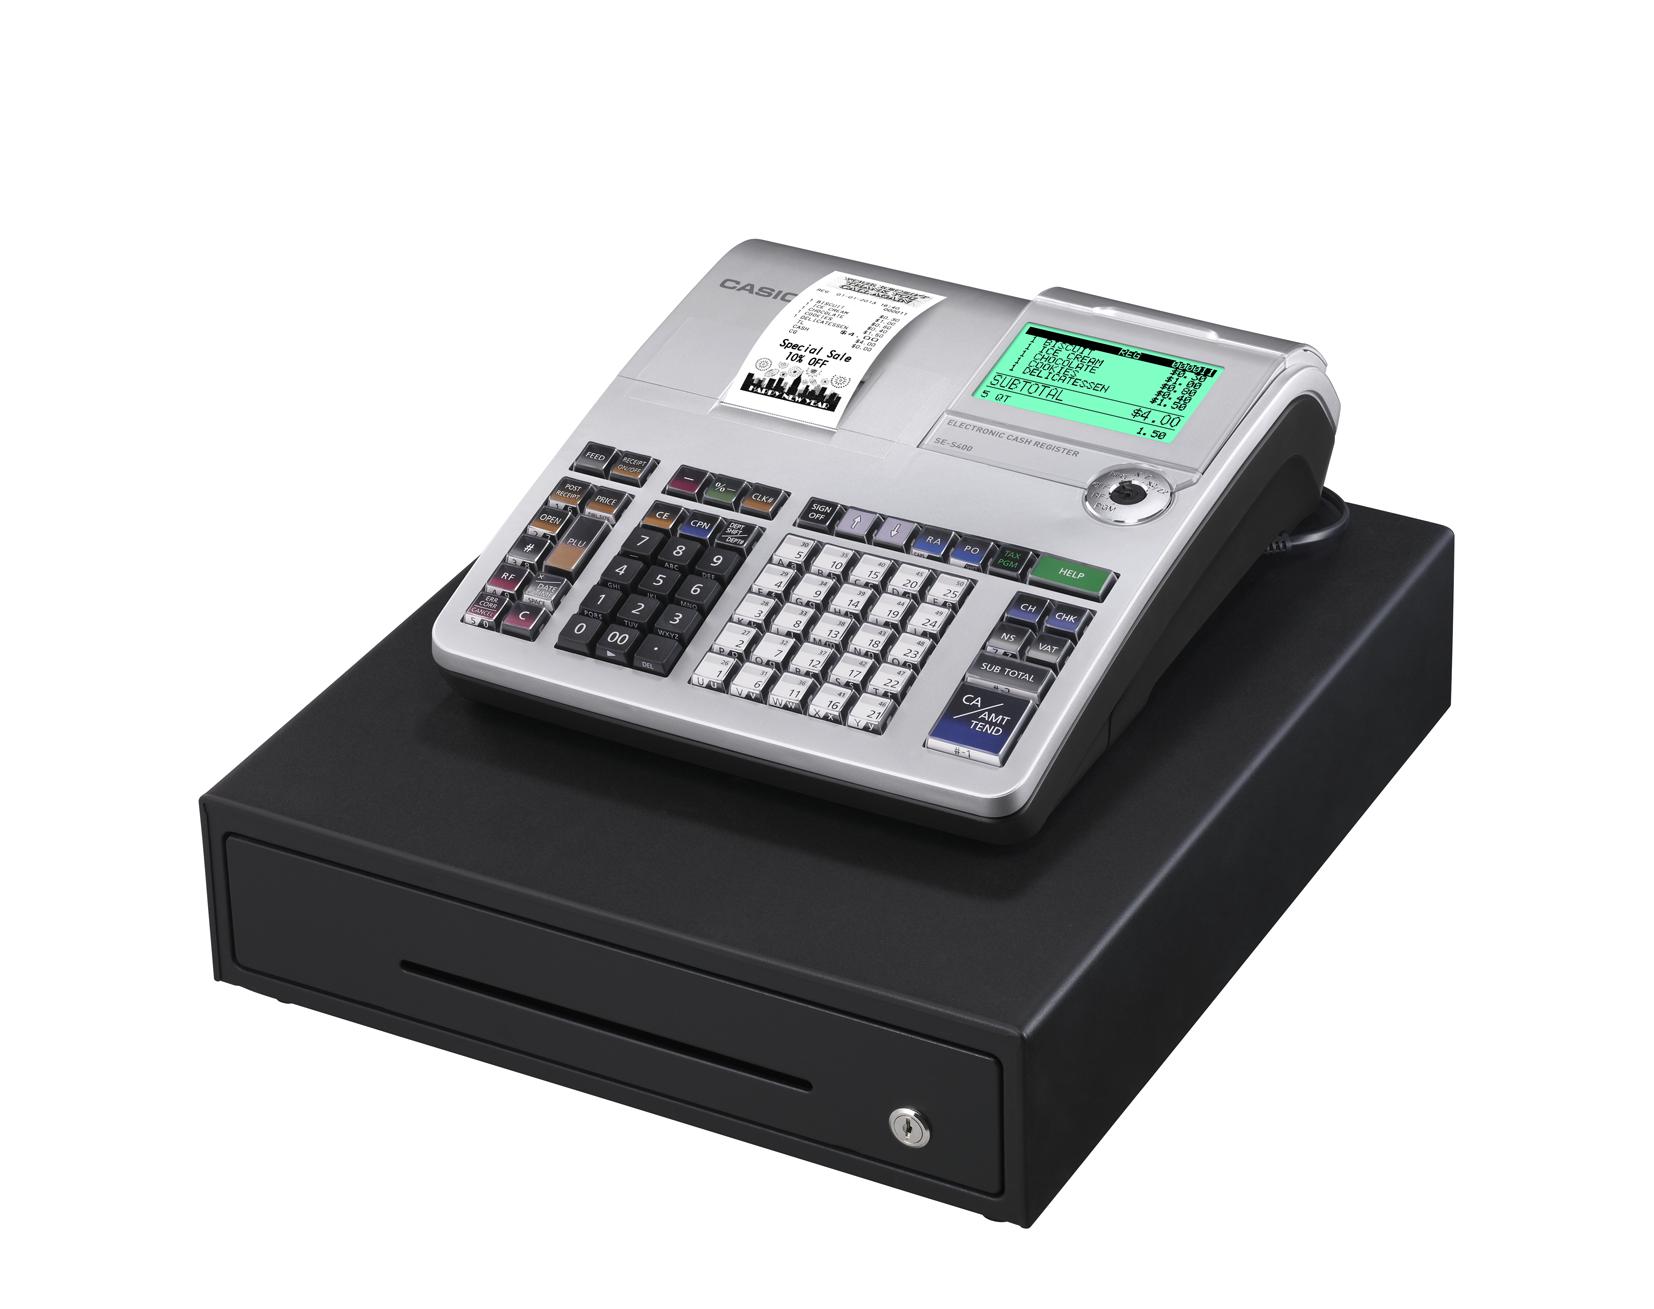 Casio SE-S400 Retail Cash Register with 25 department keys, Multi-line Operator Display and rear Popup Customer Display.